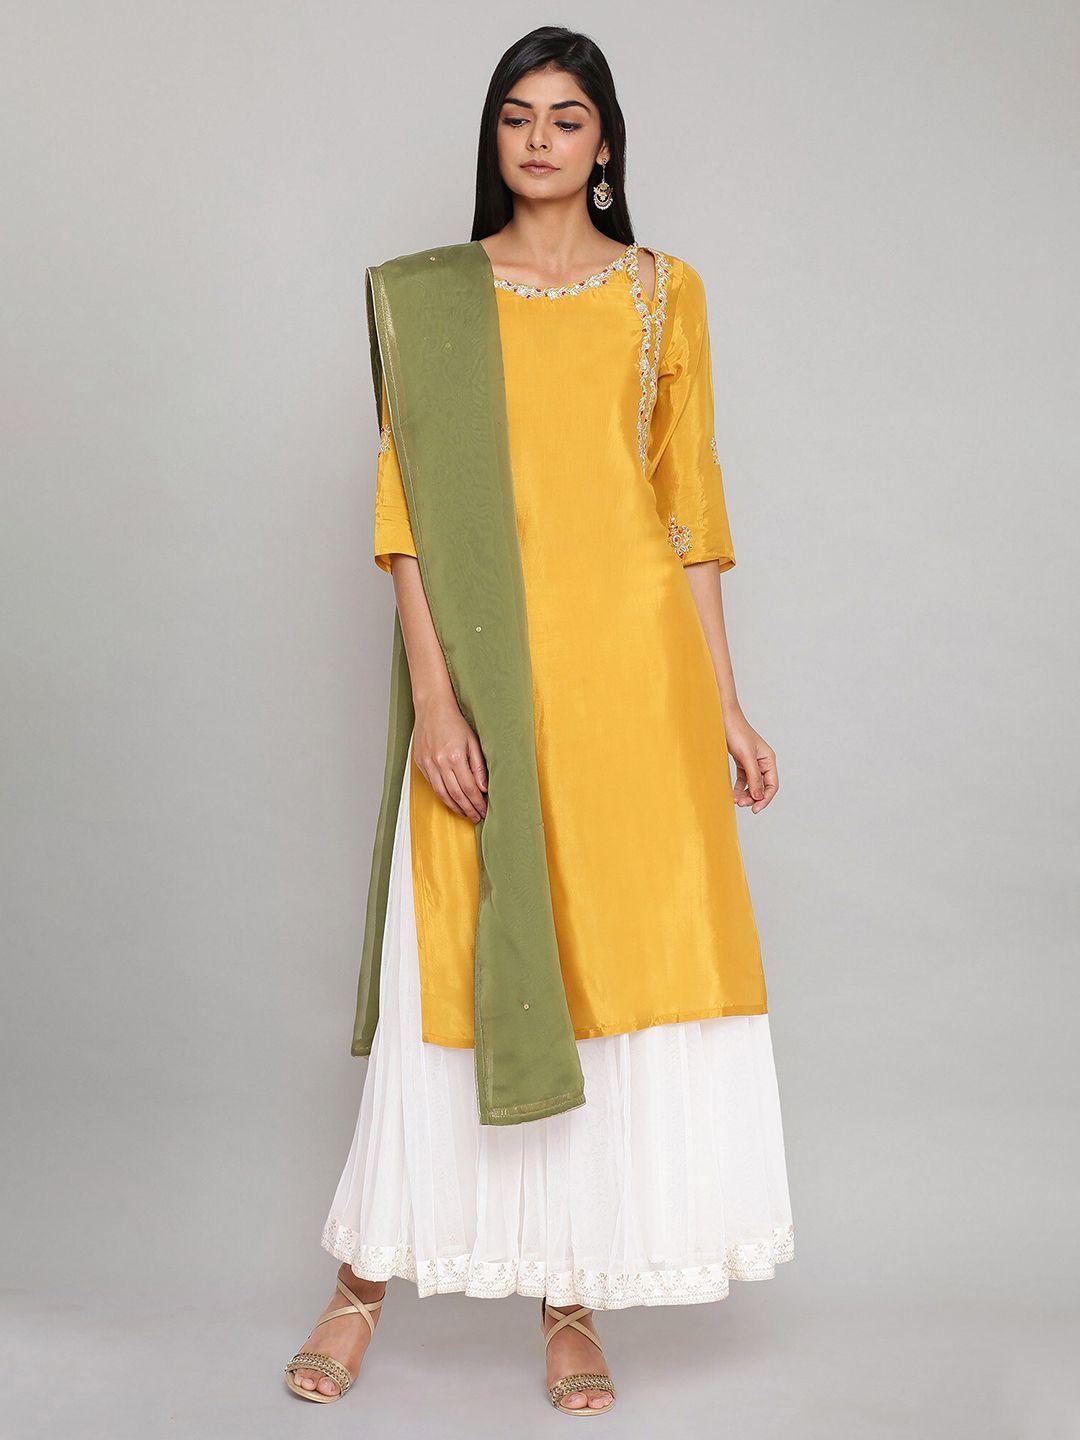 wishful-green-&-gold-toned-dupatta-with-sequinned